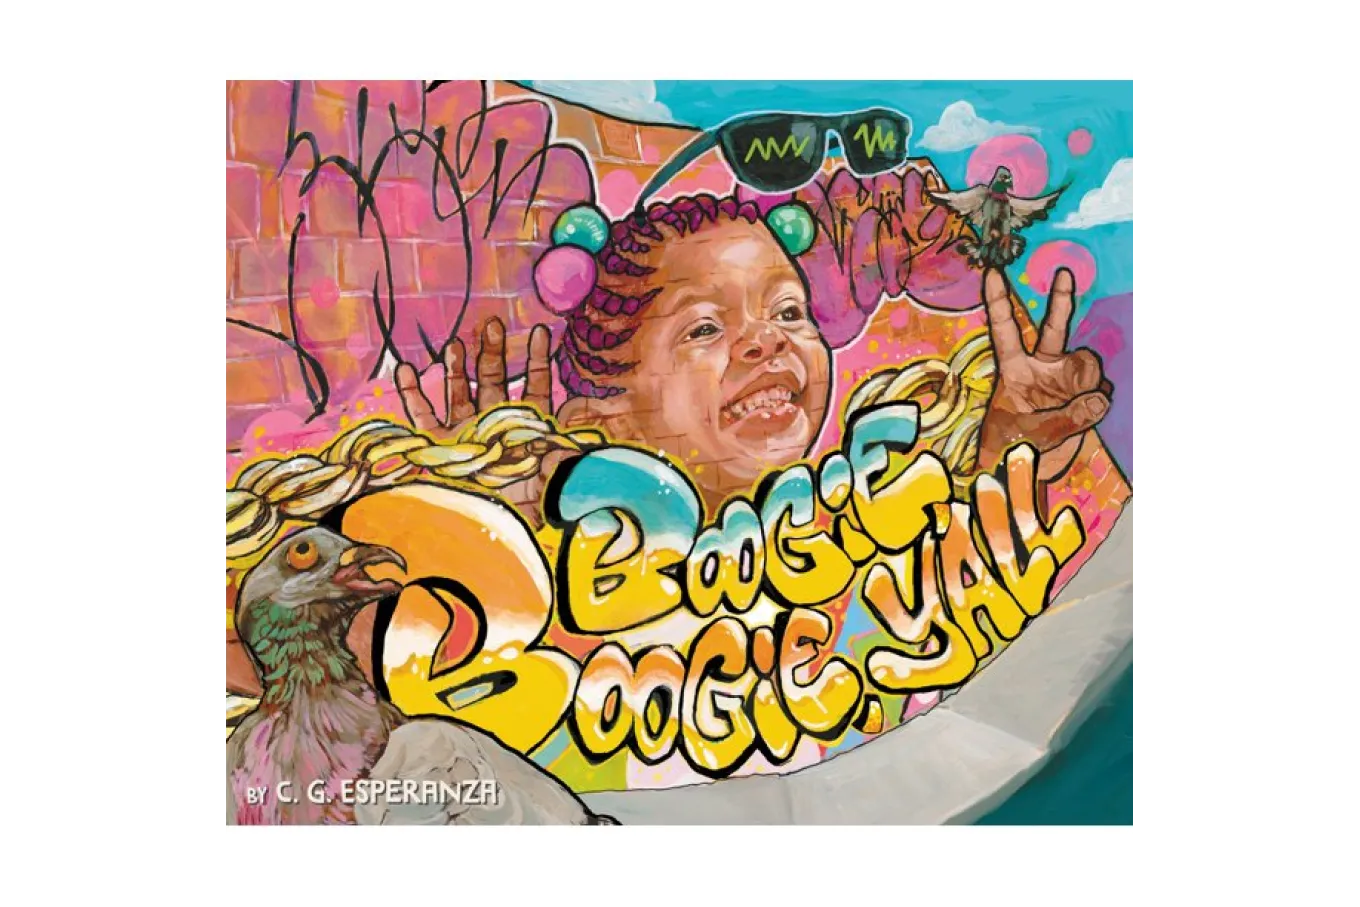 Boogie Boogie, Y'all Book Cover